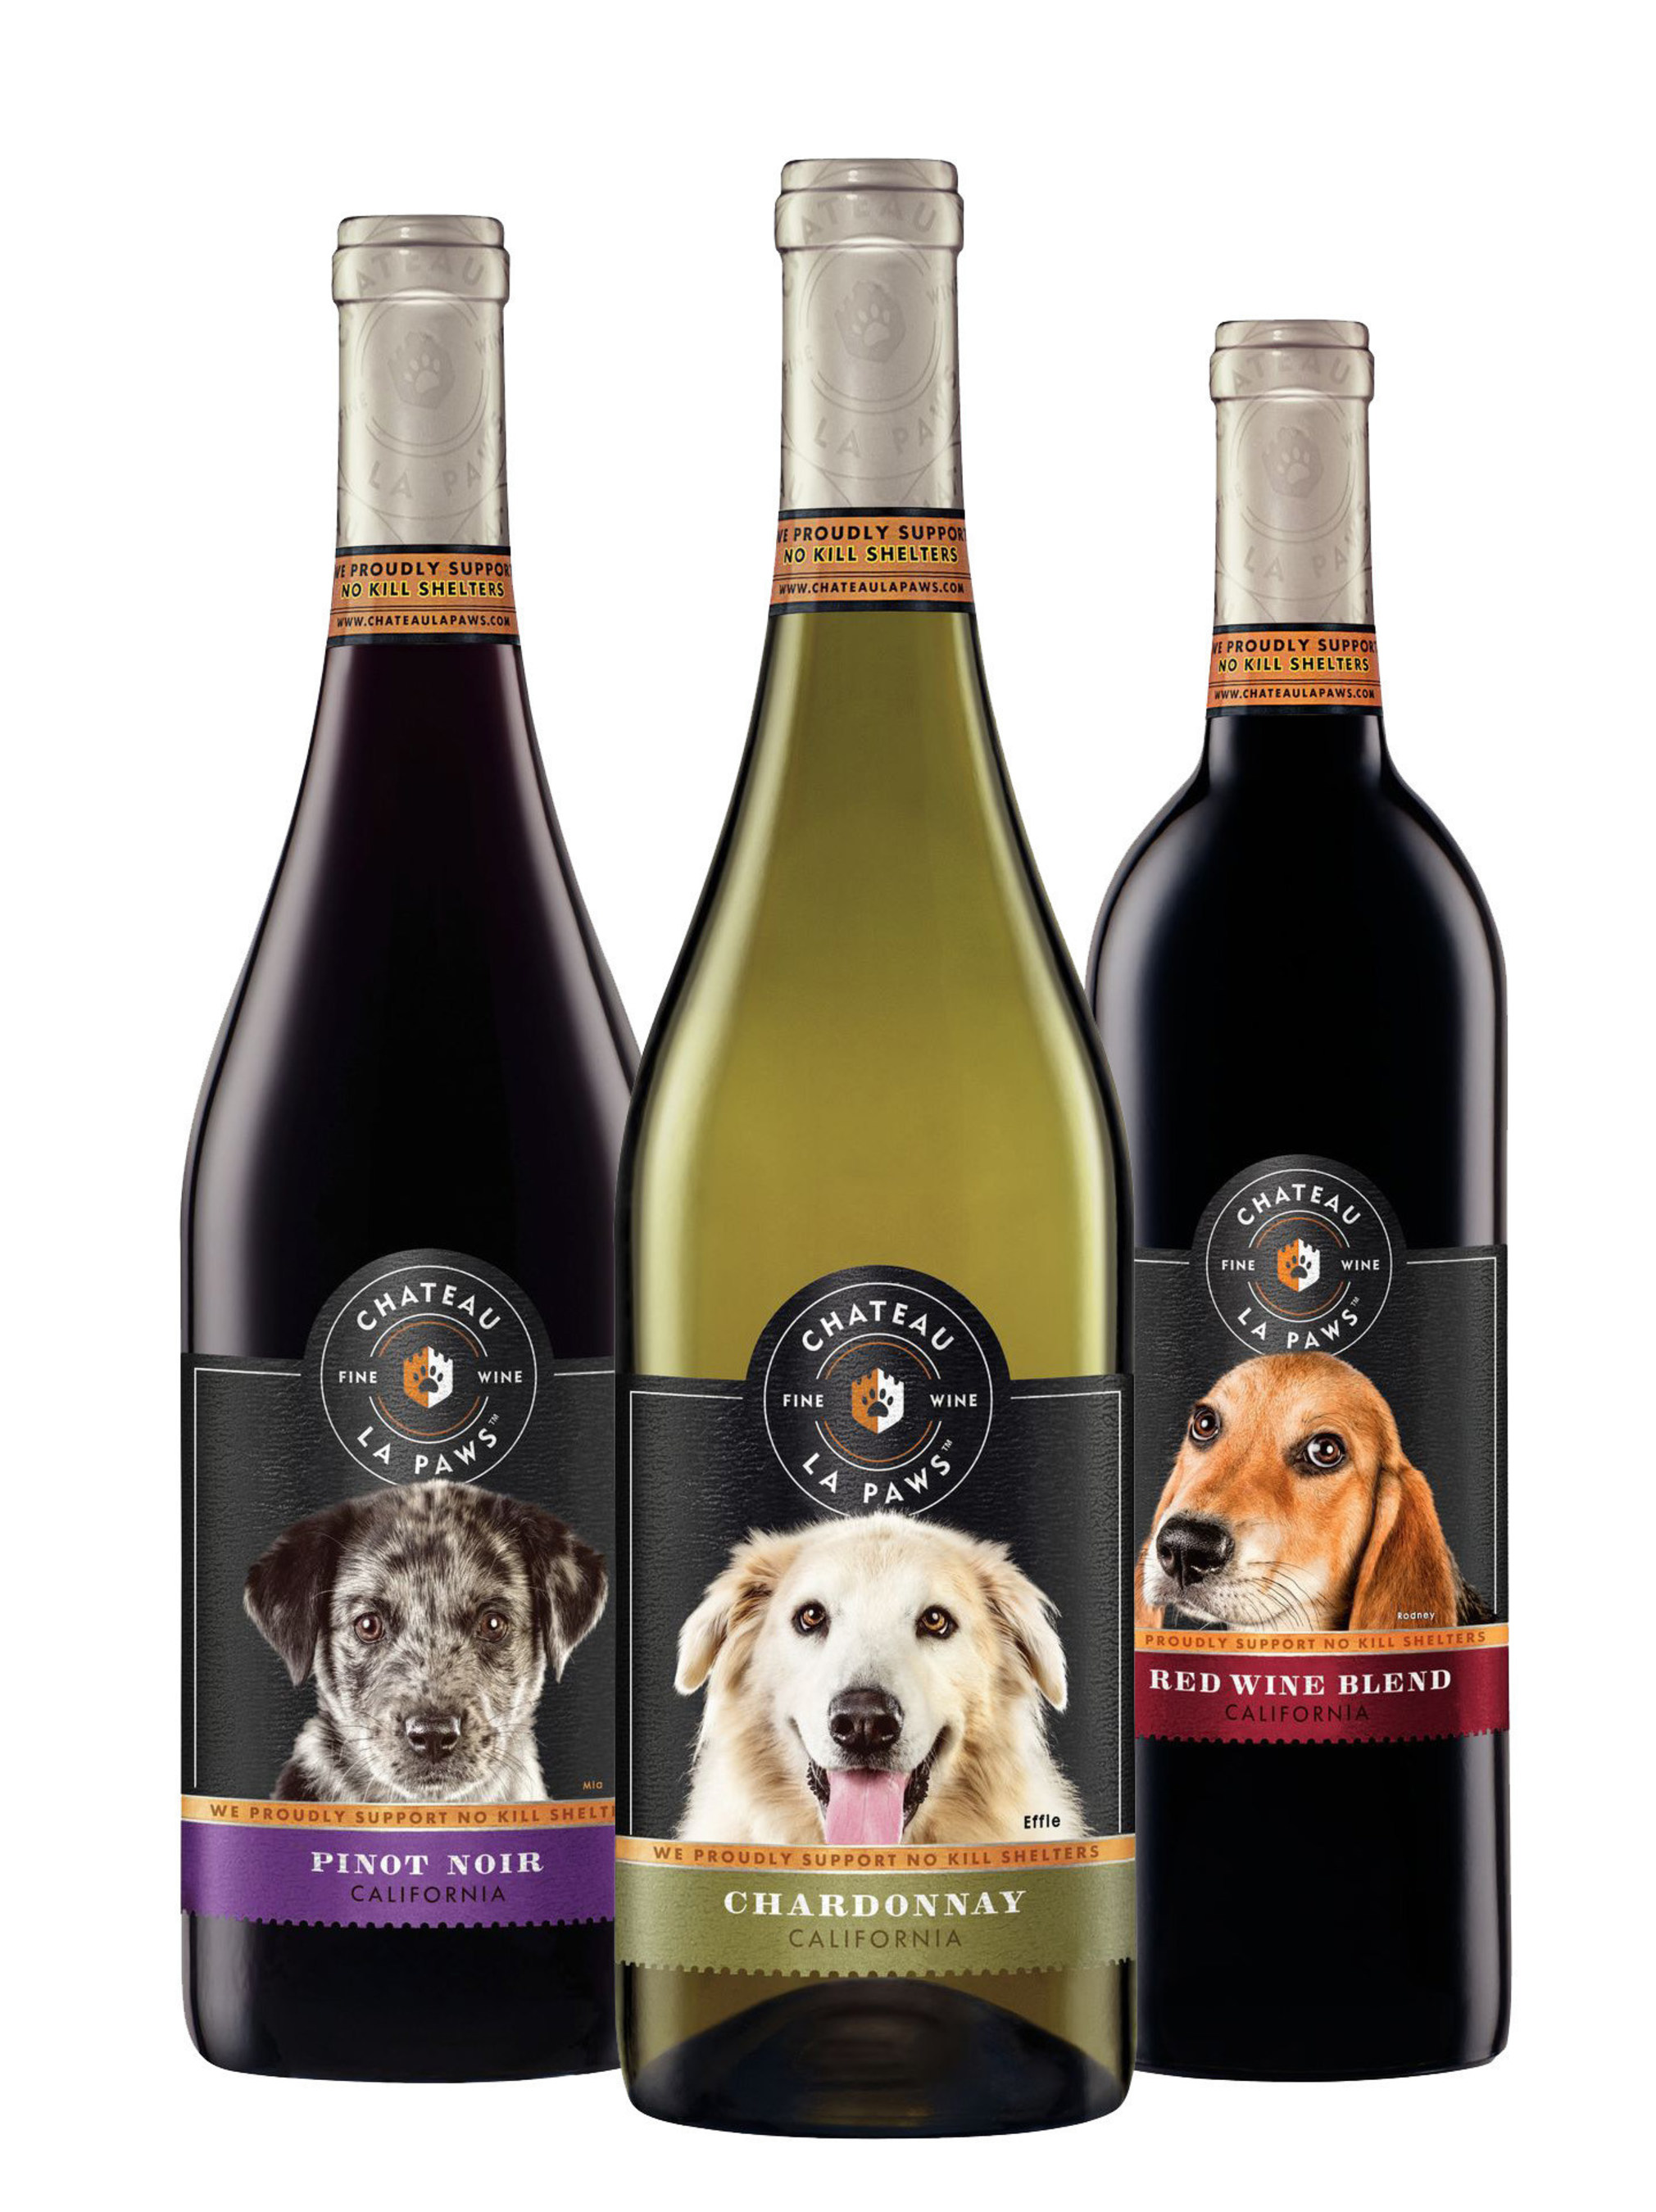 Chateau La Paws, the latest wine brand released from Diageo Chateau & Estate Wines (DC&E), launched today combining the company's love of dogs with delightful wines to create a delicious, easy drinking wine with a purpose. The mission is simple: wine lovers giving back to rescue dogs in need, helping them find a permanent chateau of their own.